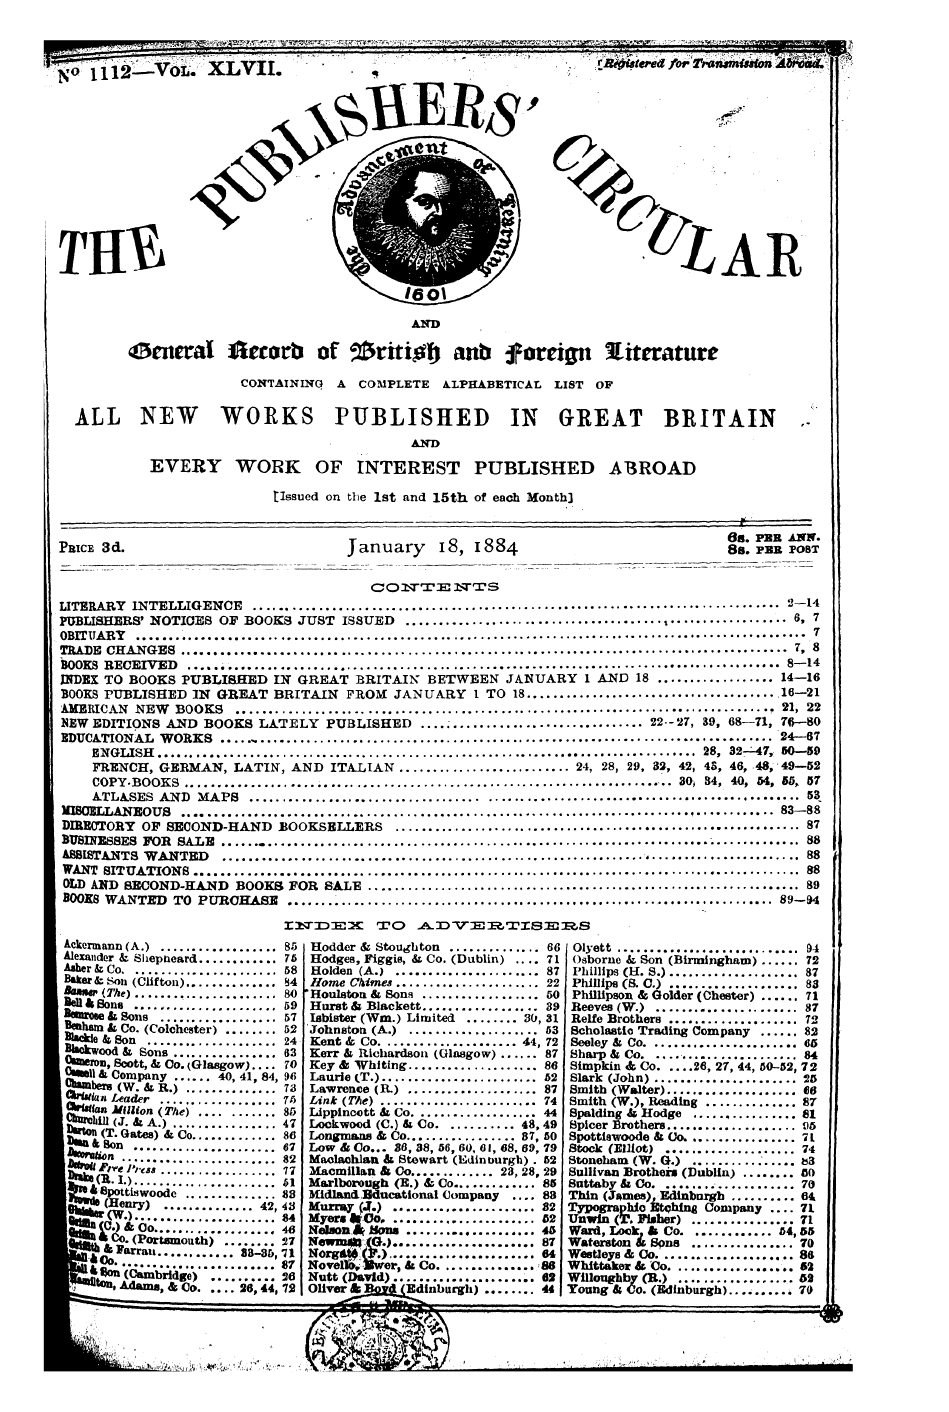 Publishers’ Circular (1880-1890): jS F Y, 1st edition - Ooitteitts